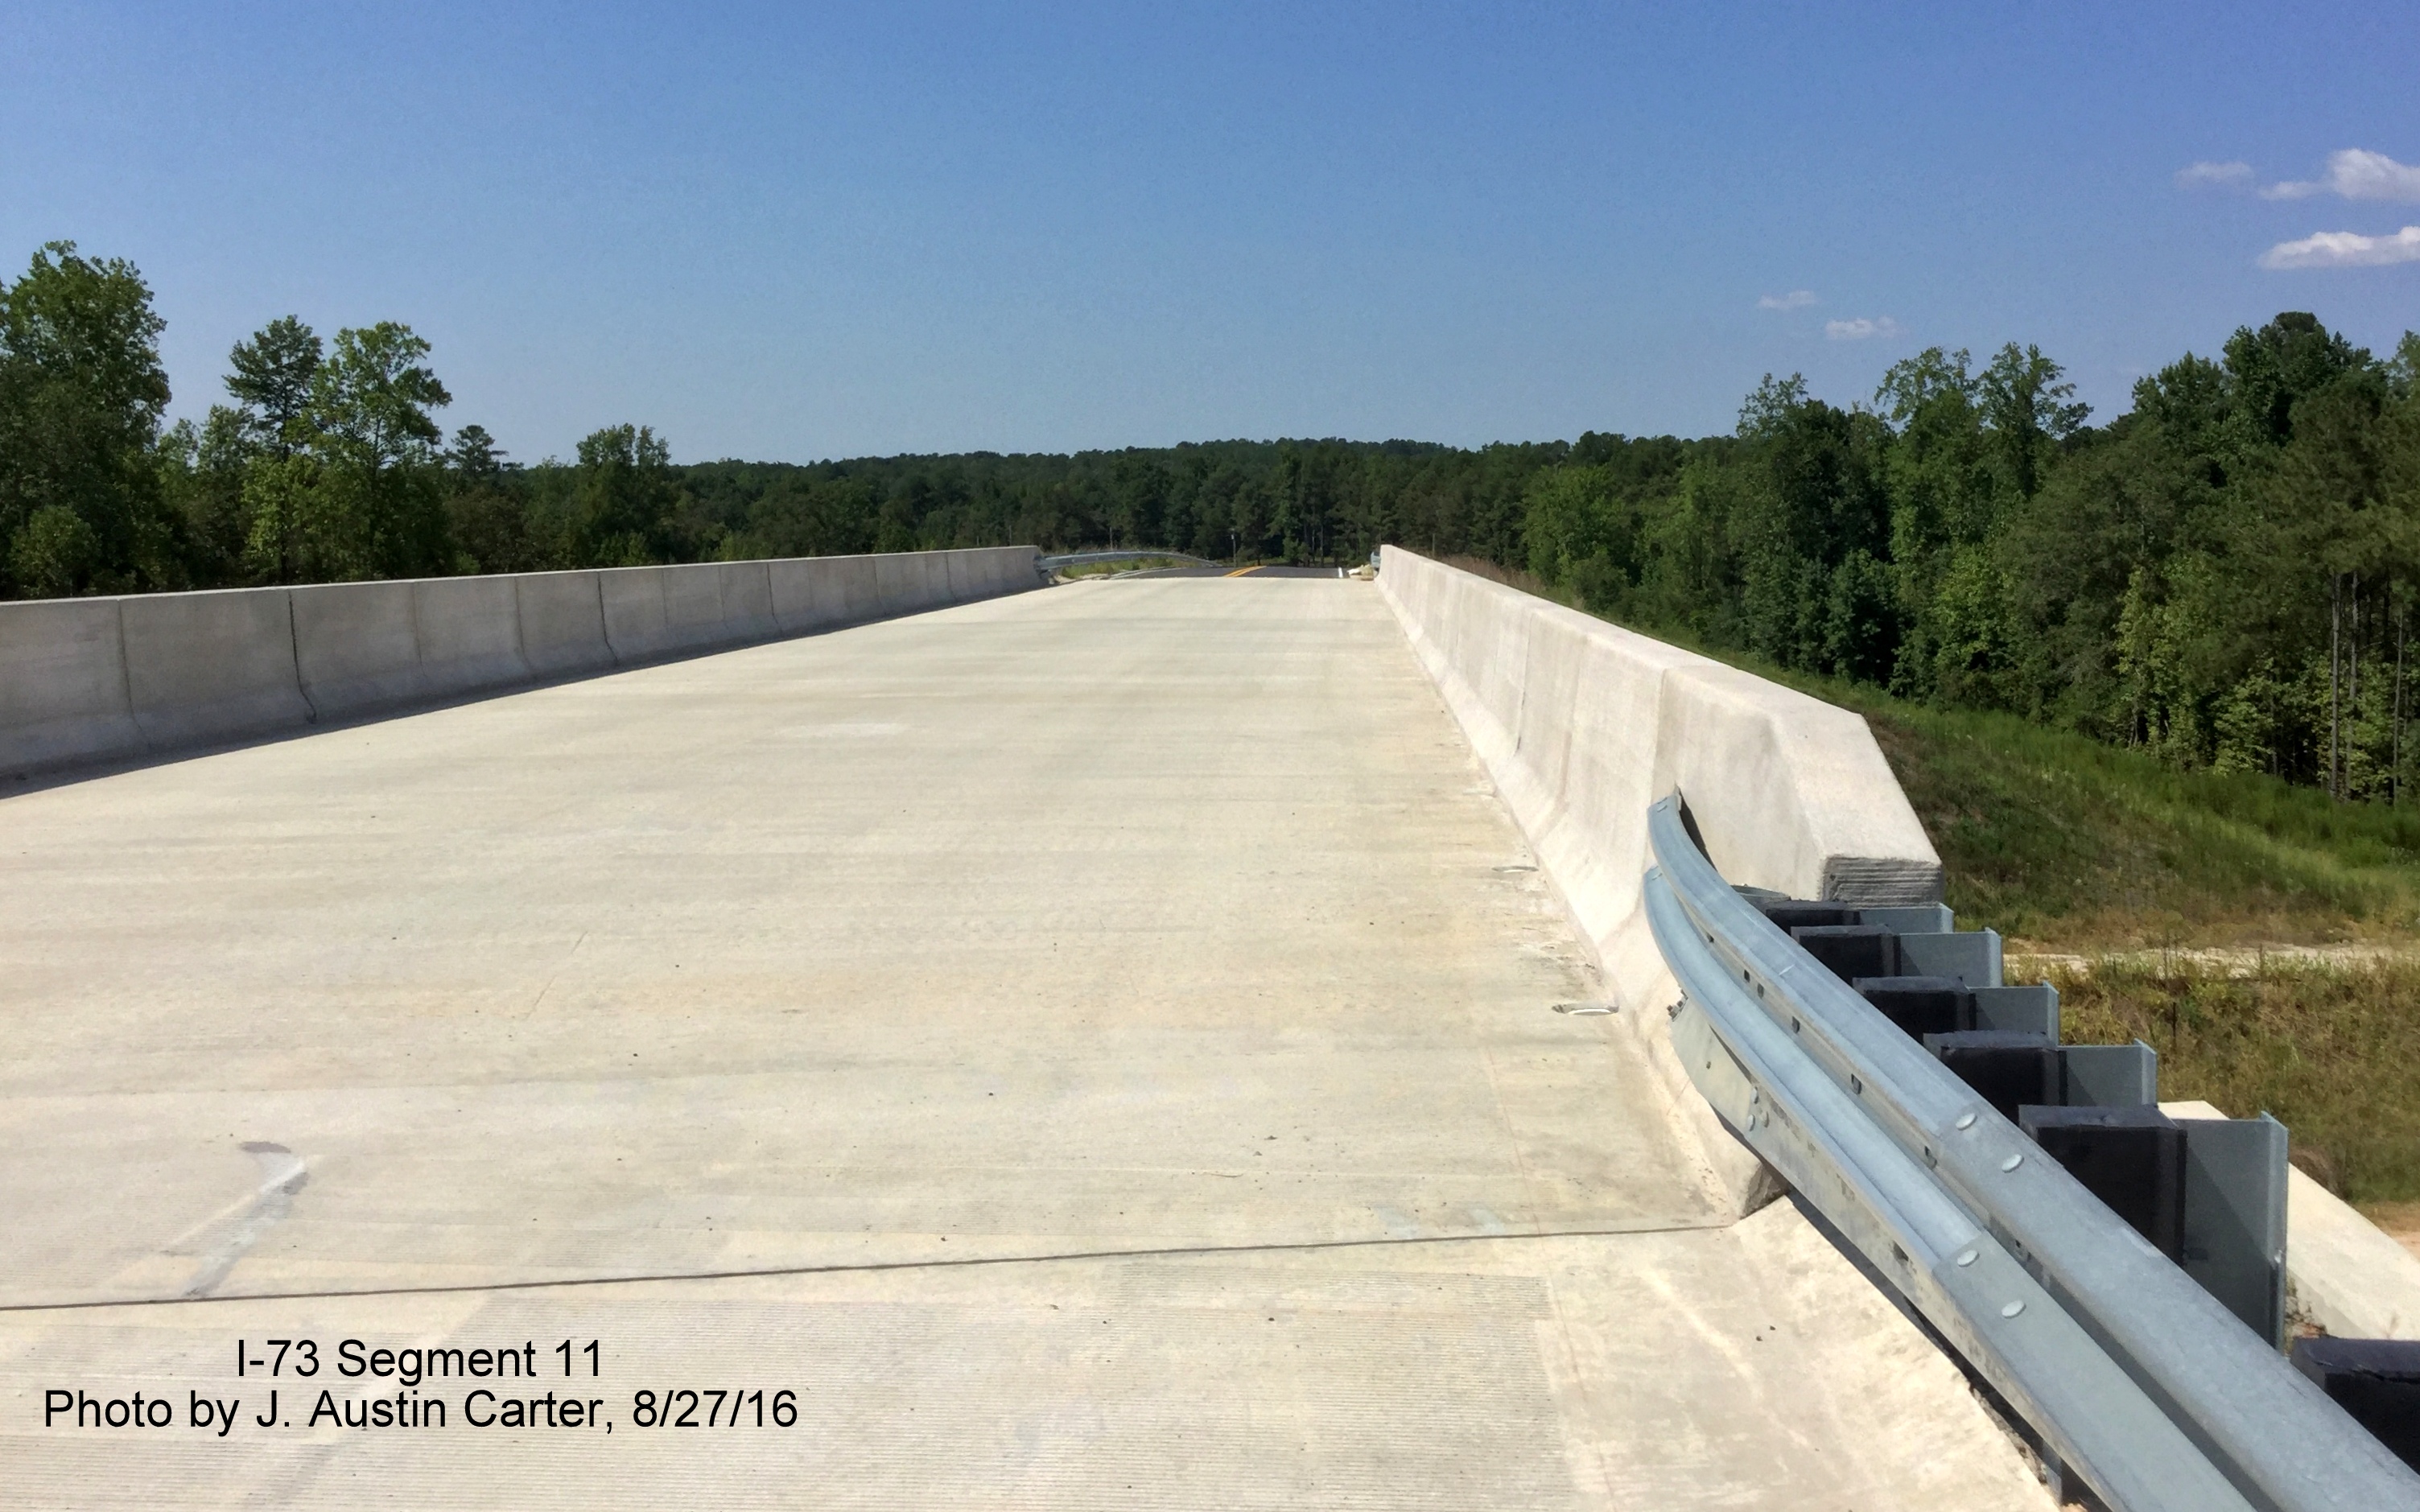 Image taken of new bridge over future I-73/&4 Bypass north of Rockingham, by J. Austin Carter